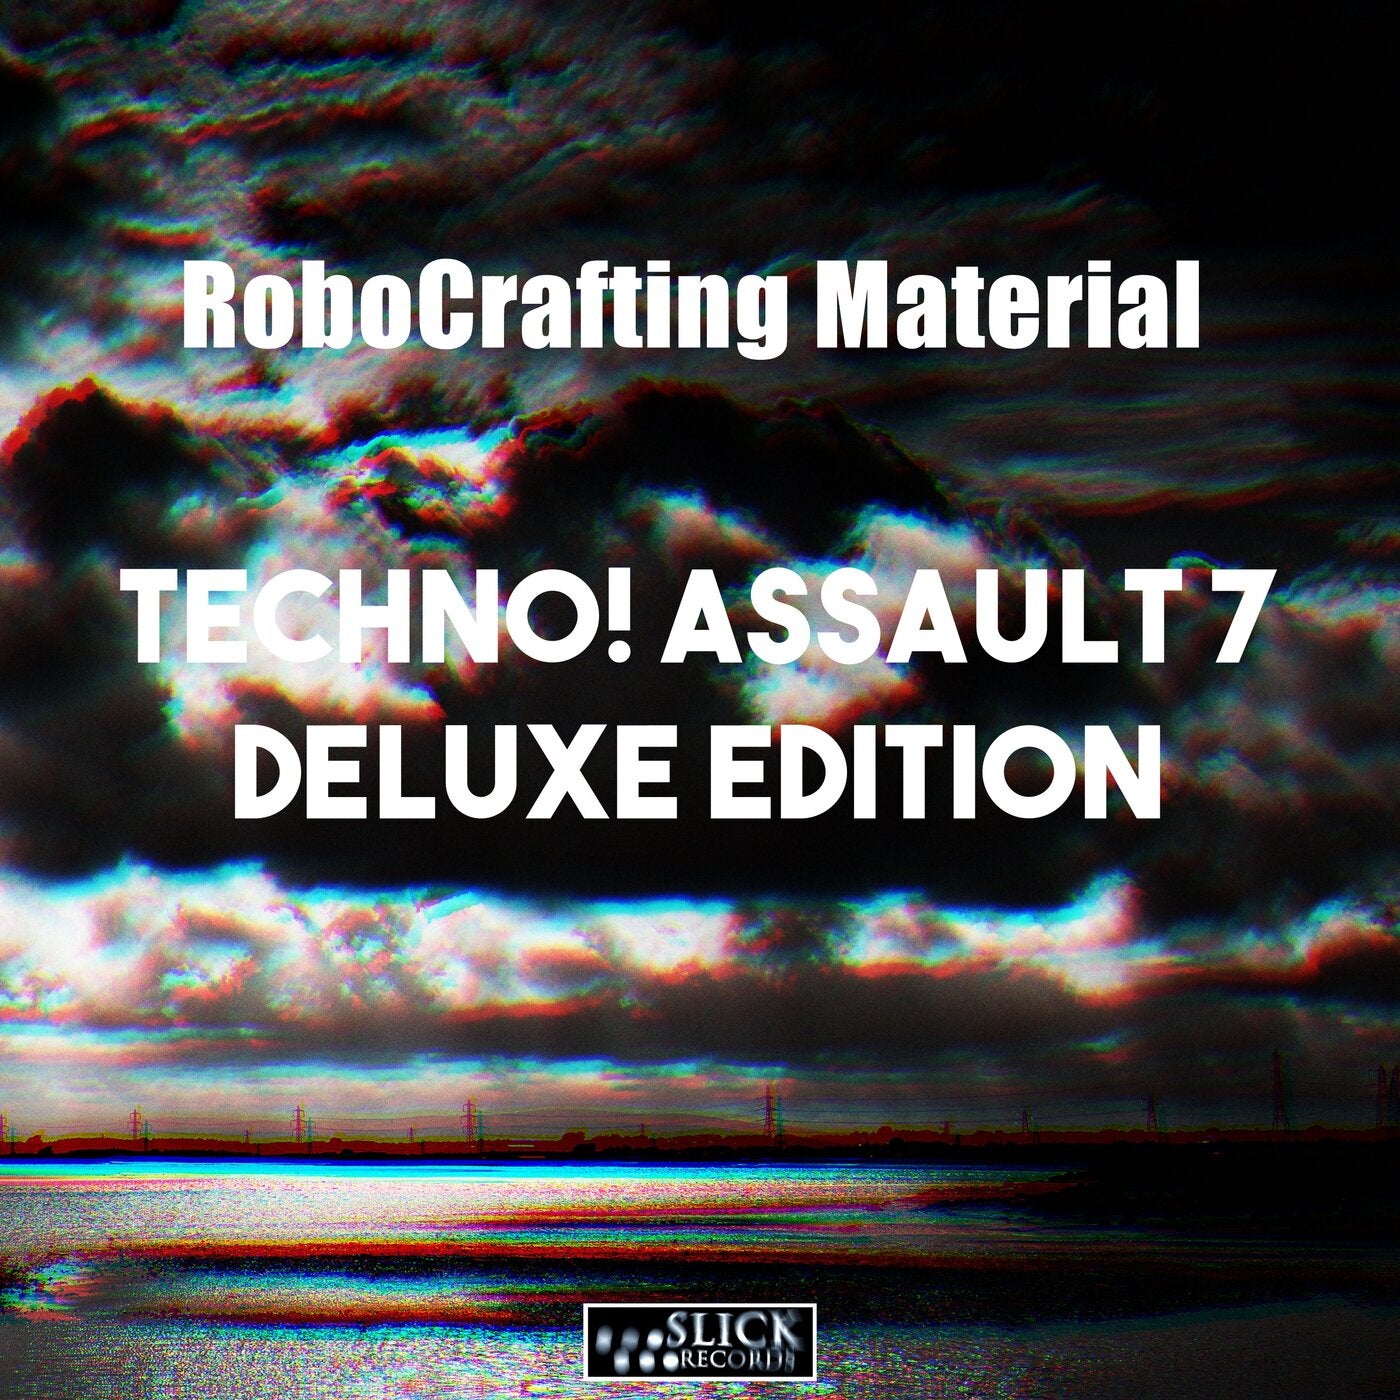 TECHNO! ASSAULT 7 DELUXE EDITION